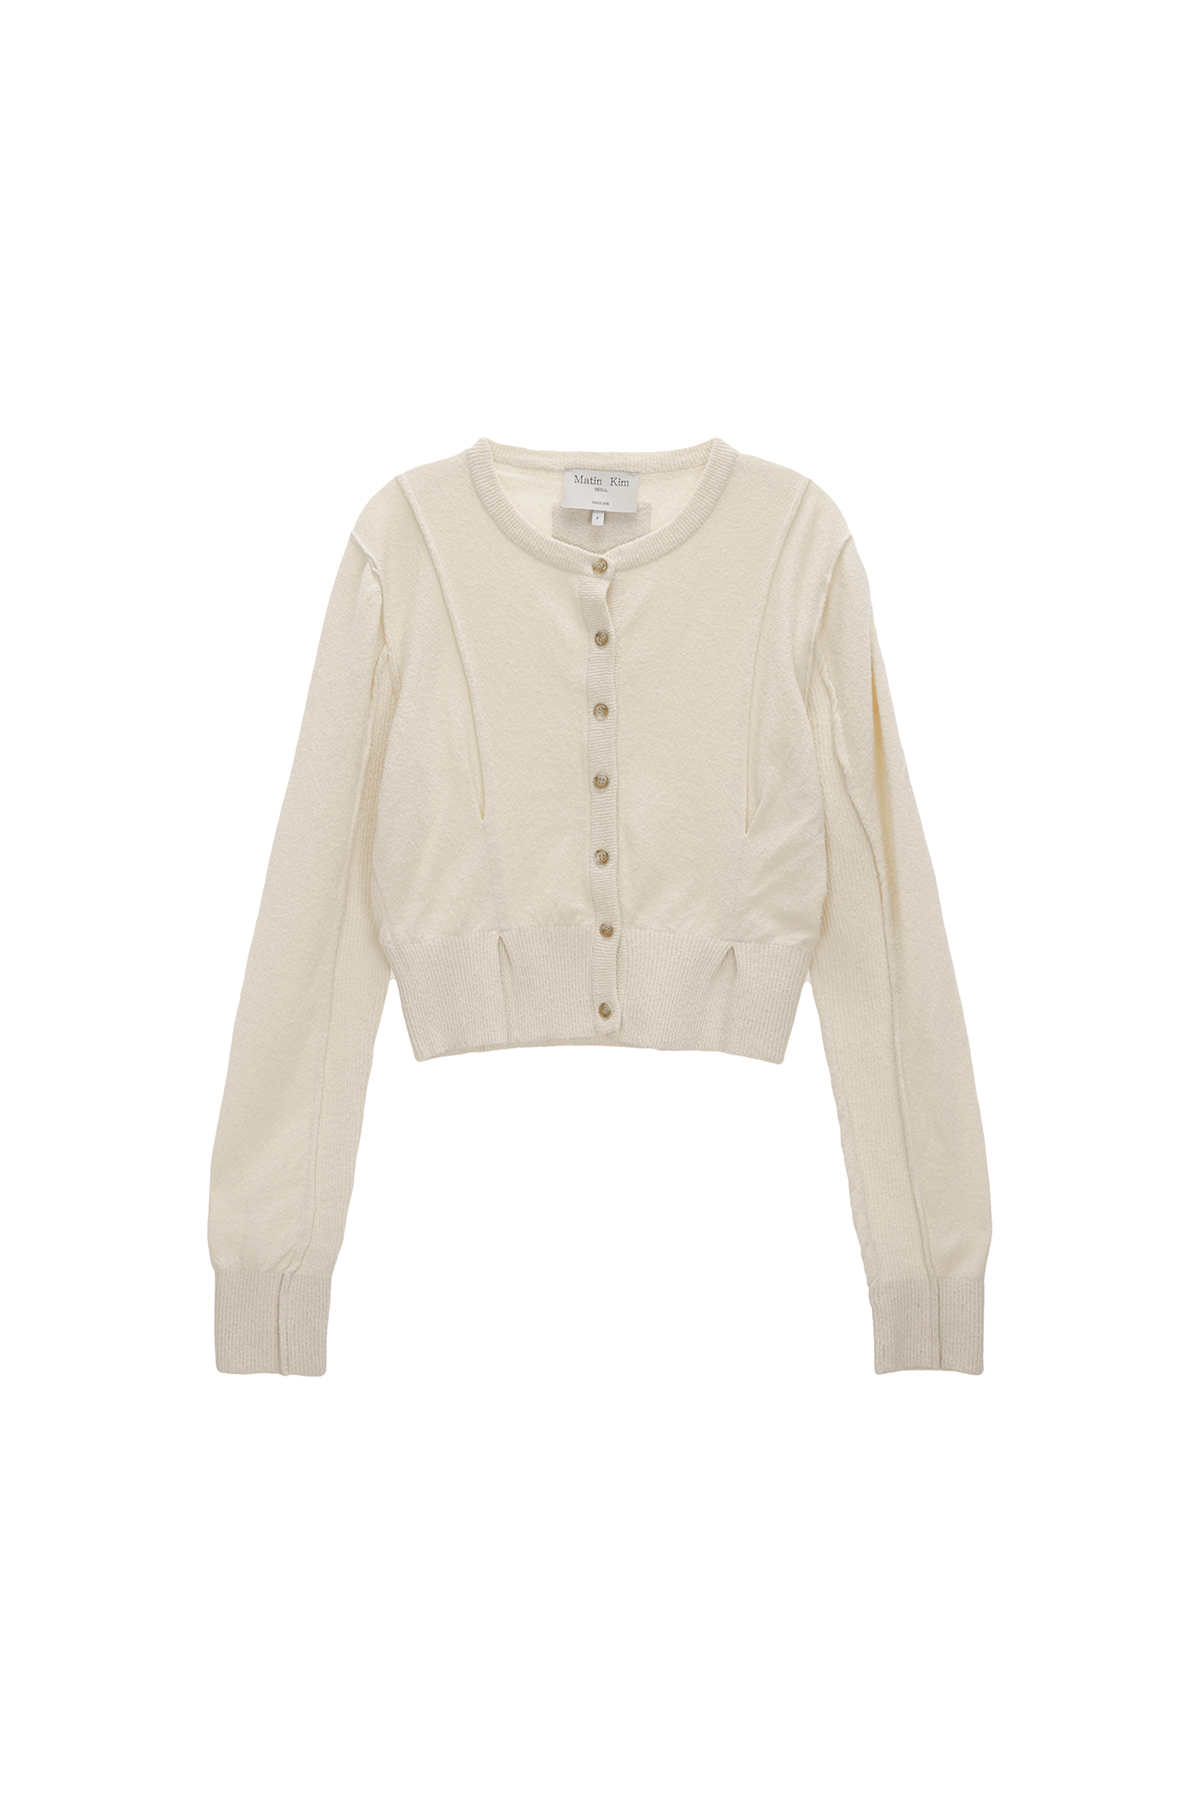 PINTUCK POINT KNIT CARDIGAN IN IVORY